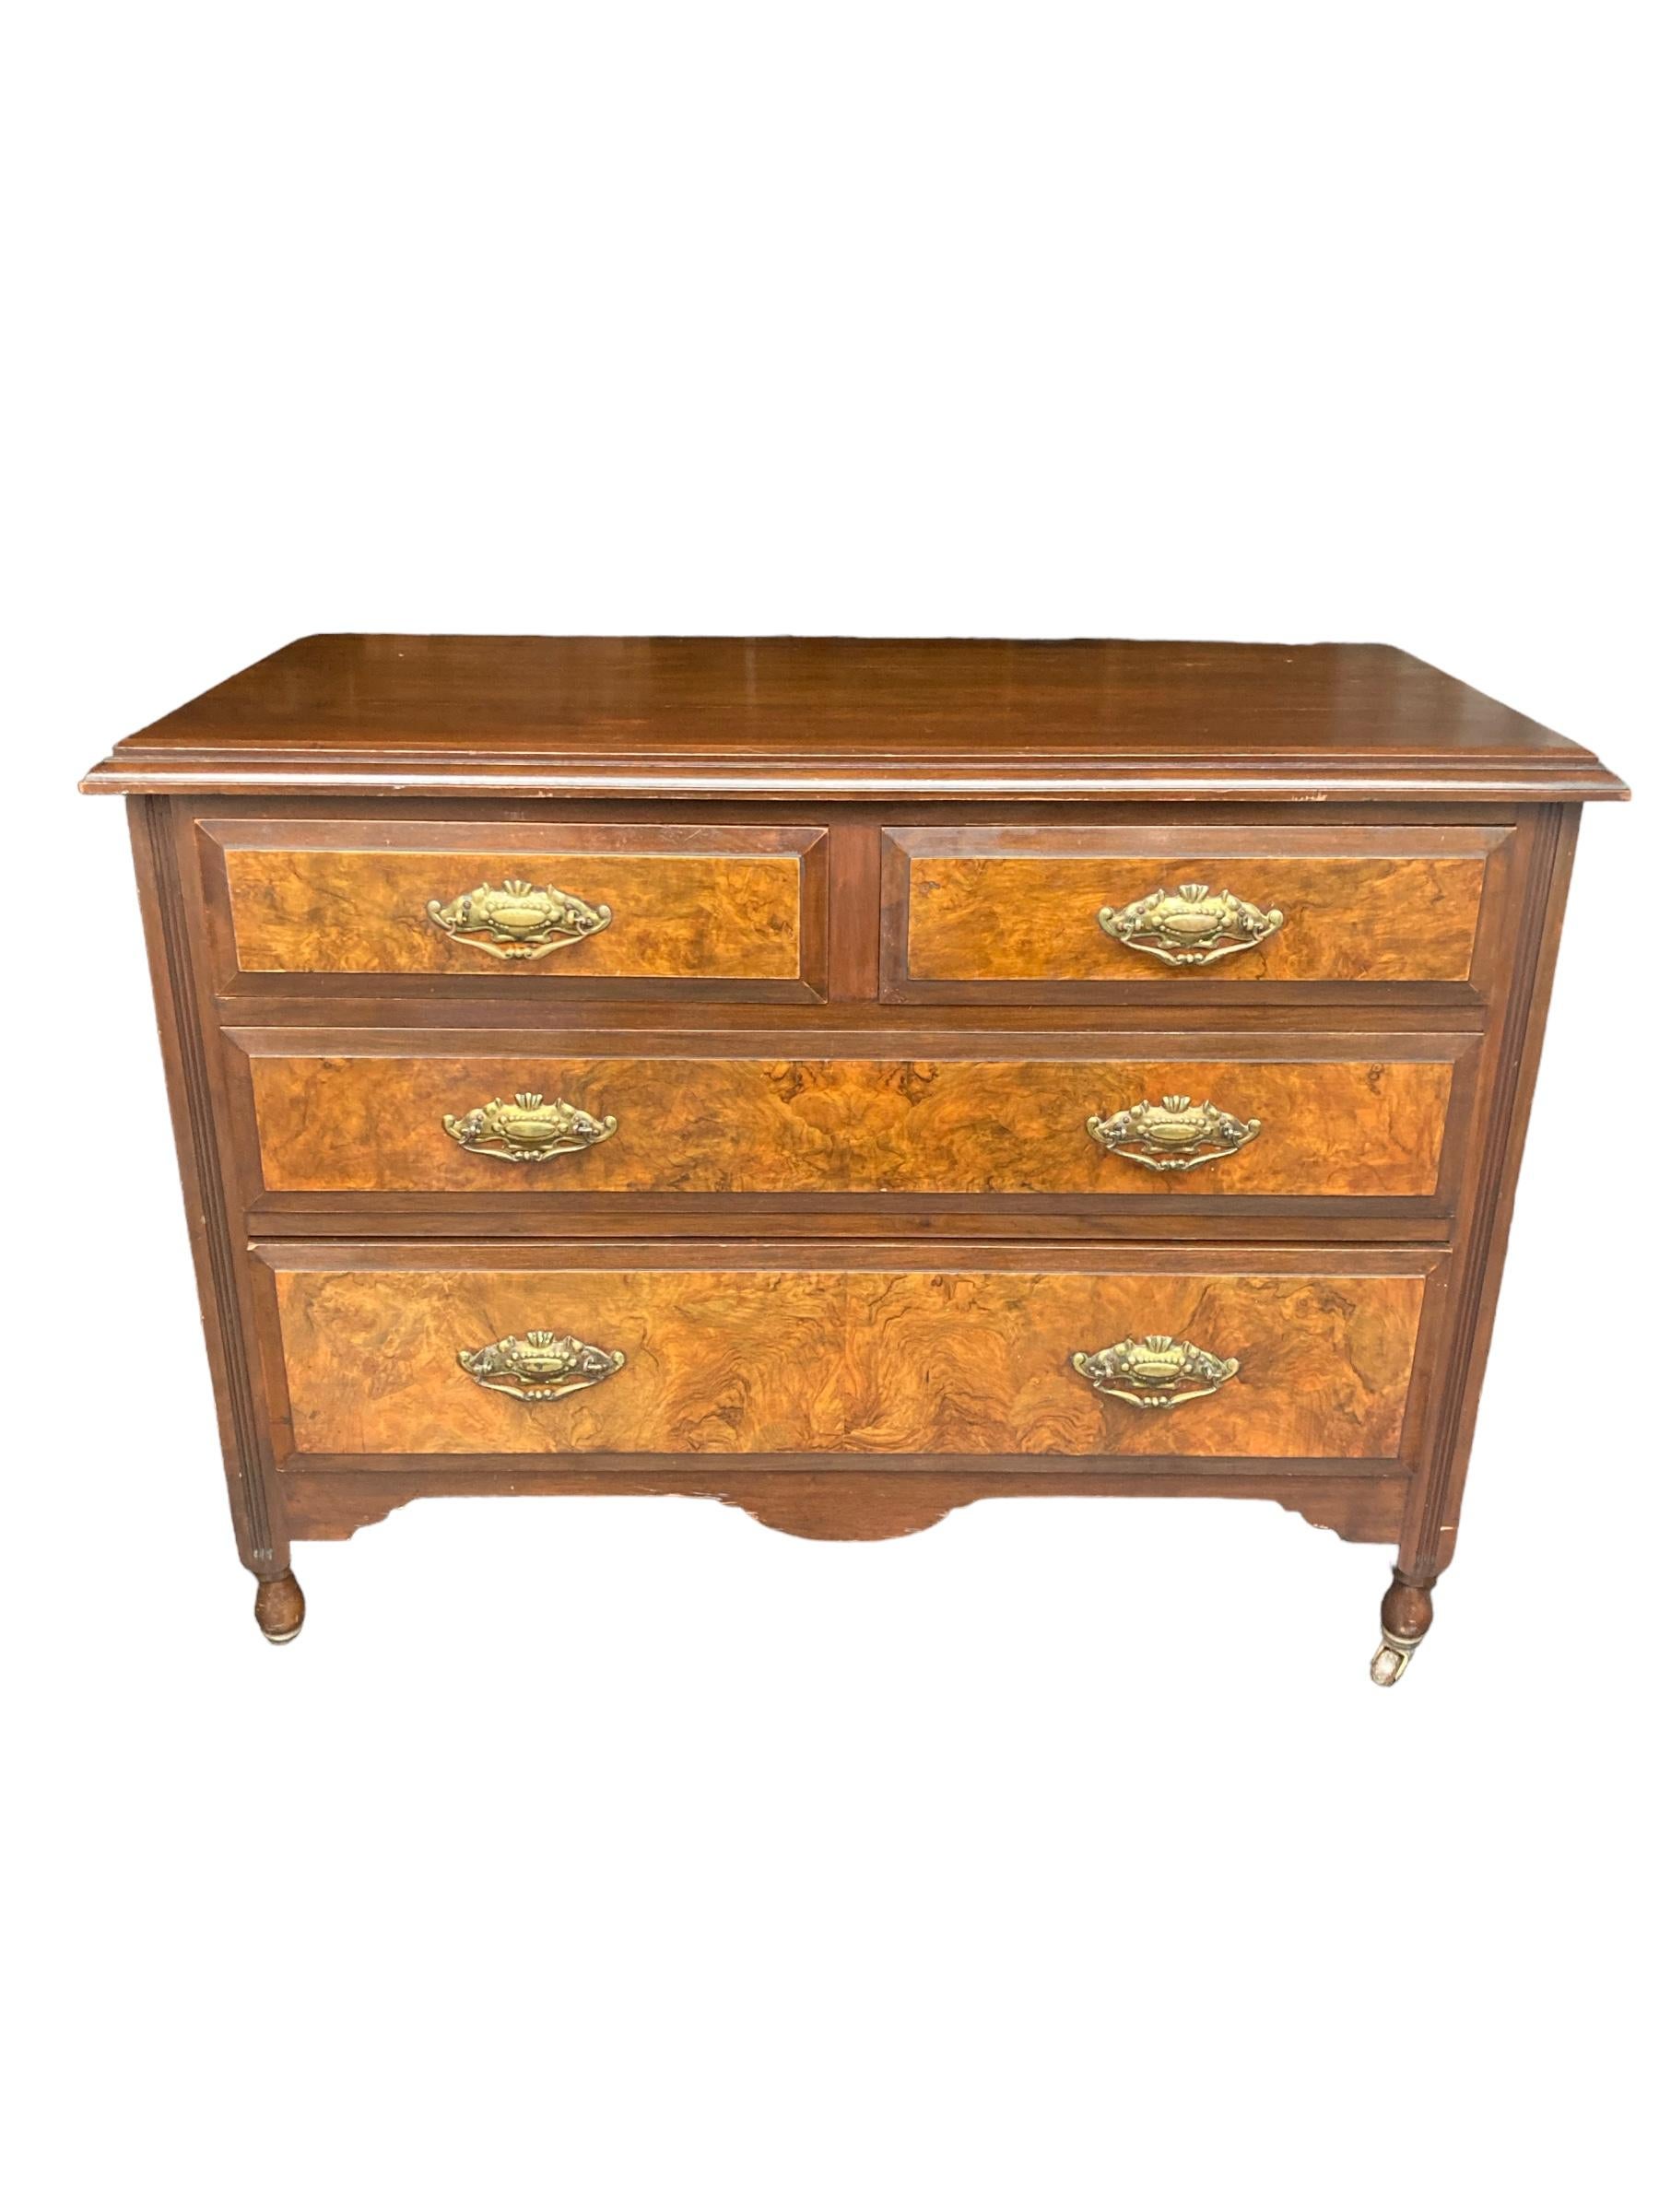 Walnut two over two chest of drawers on original casters in good condition, Graduated drawers. Previously a dressing table and would have had a mirror to the back but now converted back to a chest of drawers.
Good structurally solid piece, a robust,